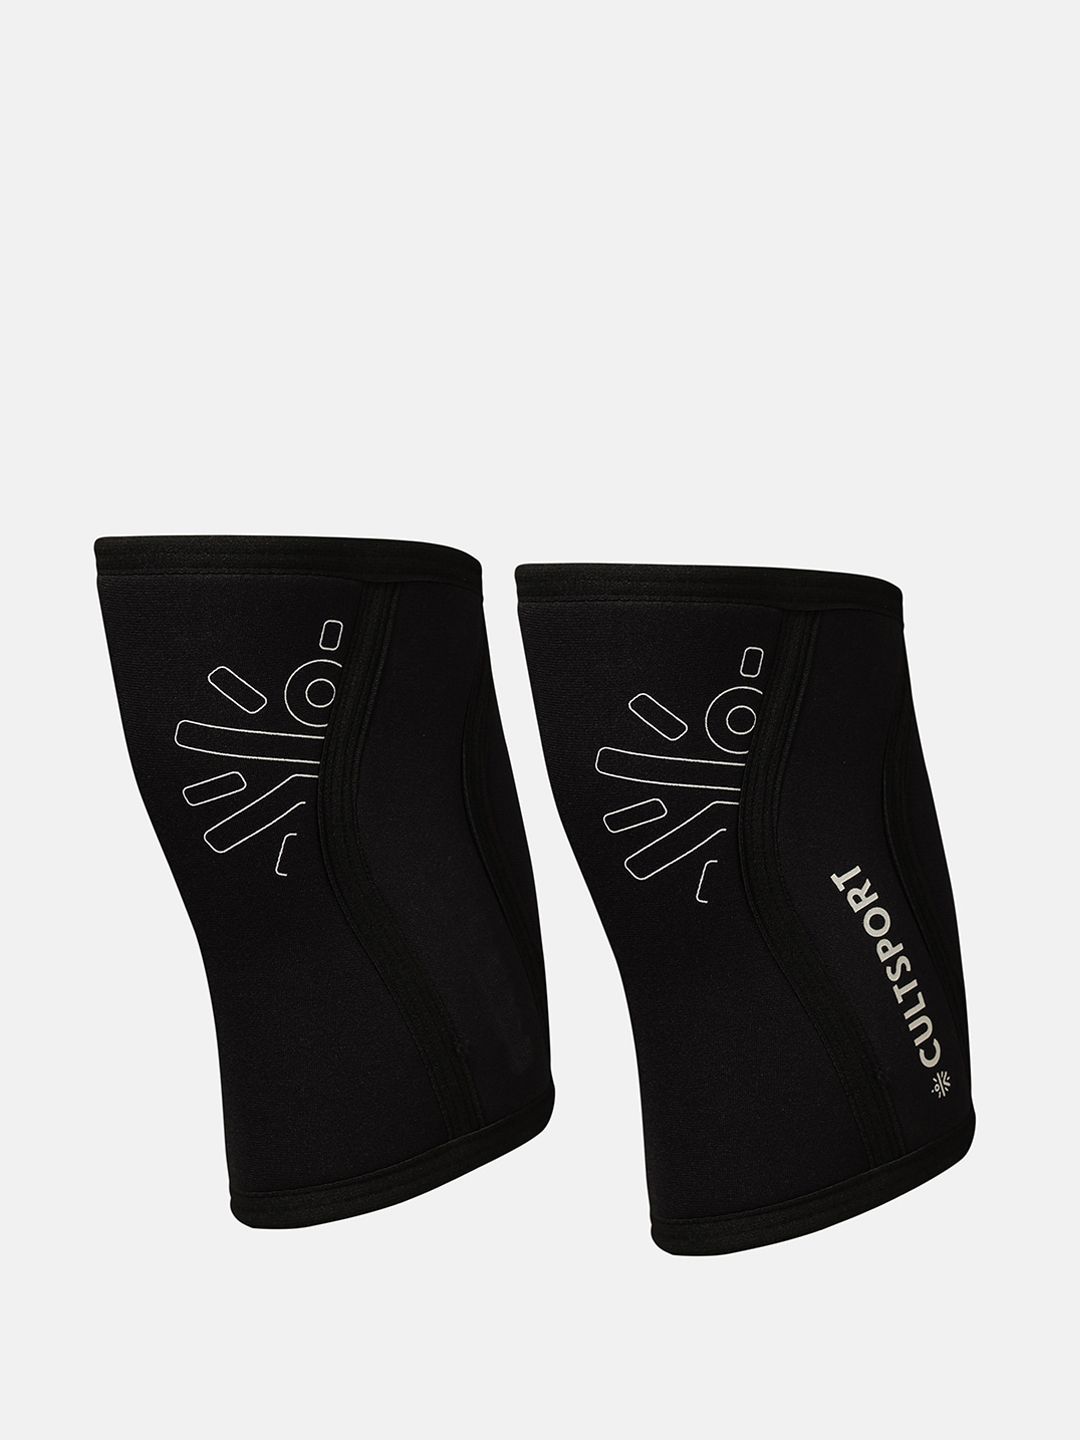 Cultsport Black & White Brand Logo Printed Knee Protector Sleeves Price in India